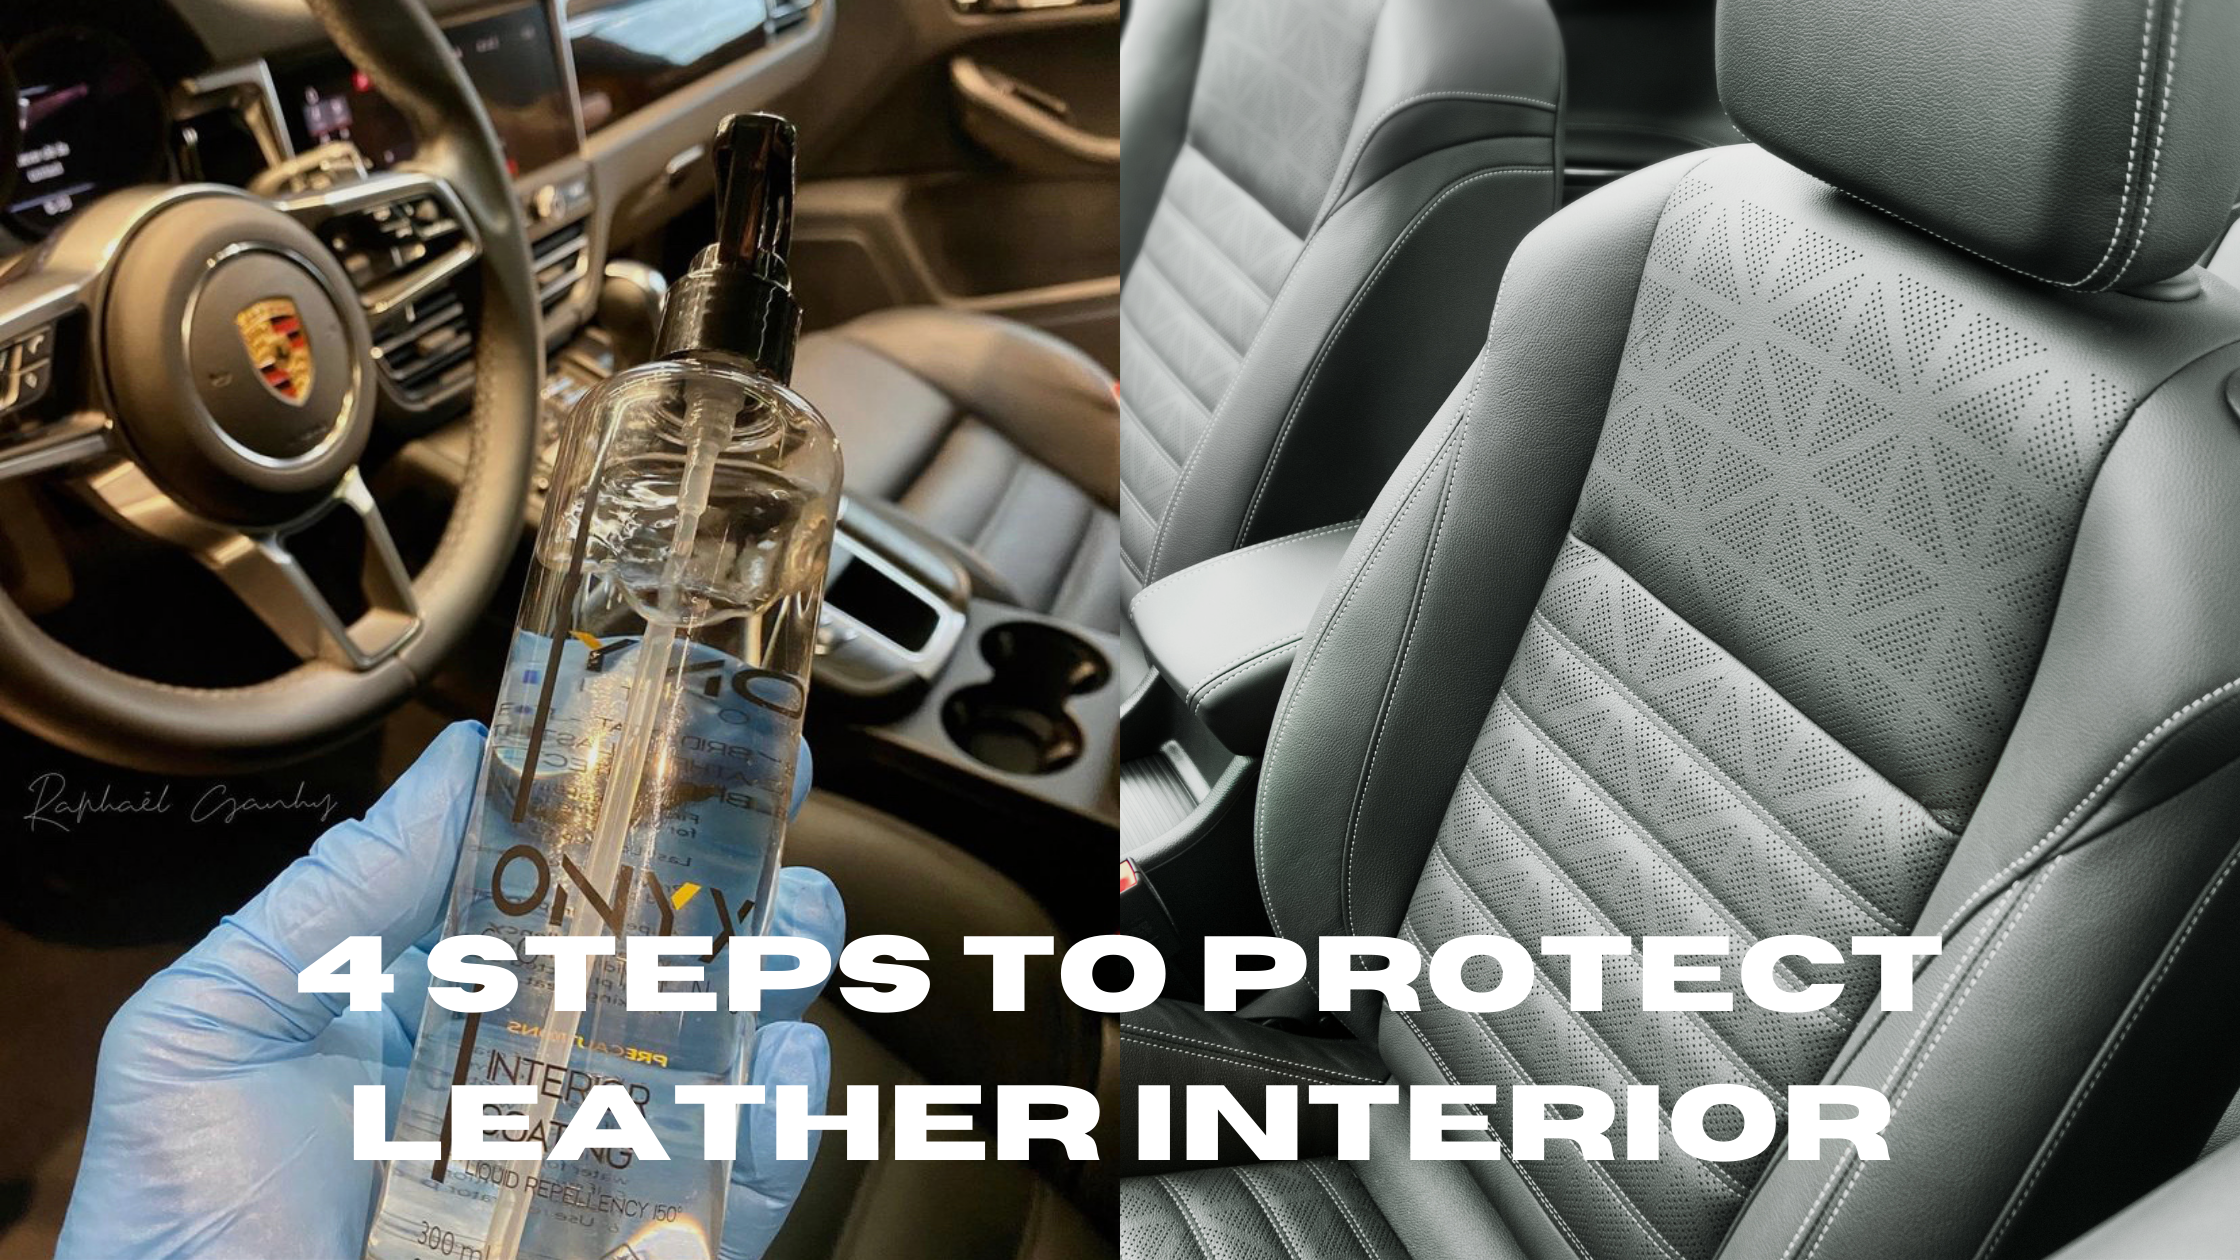 4 steps to protect leather interior